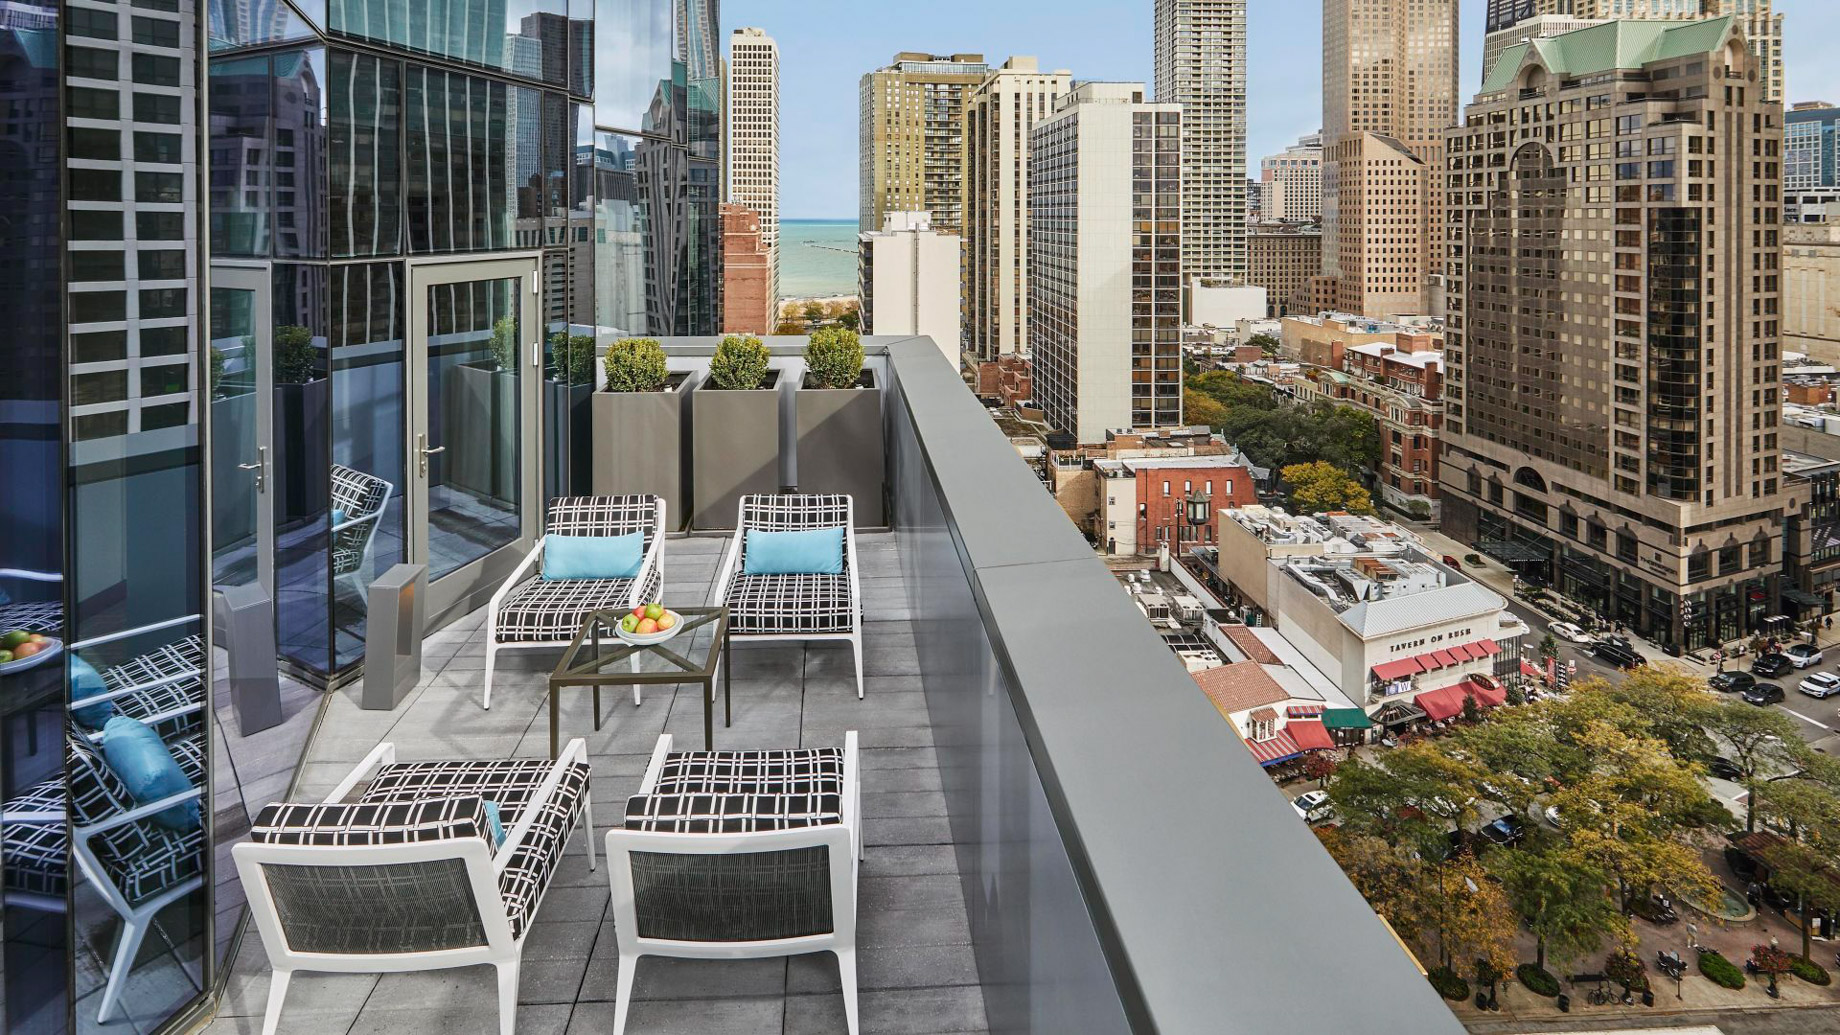 Viceroy Chicago Hotel – Chicago, IL, USA – Penthouse Suite Balcony